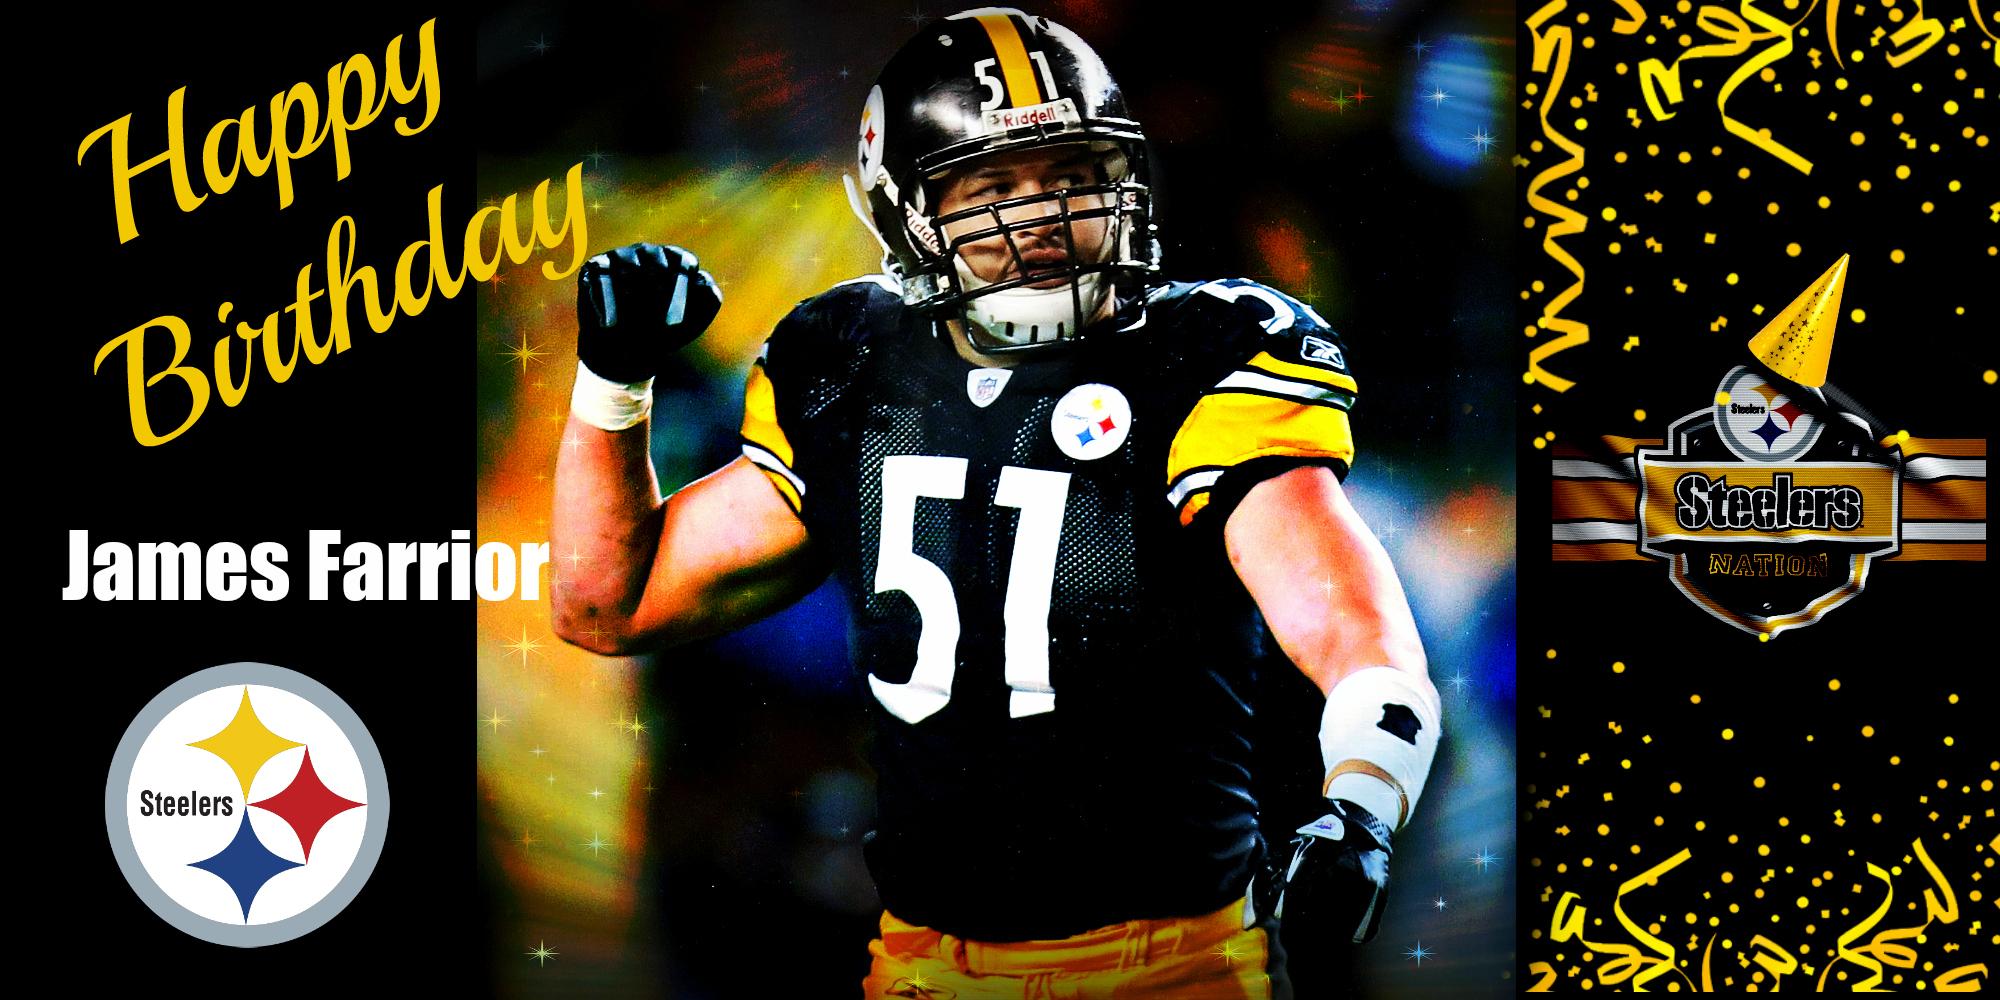 Wishing Steeler great James Farrior a Very Happy 40th BDay! 
Lots of happiness & blessings to you! 